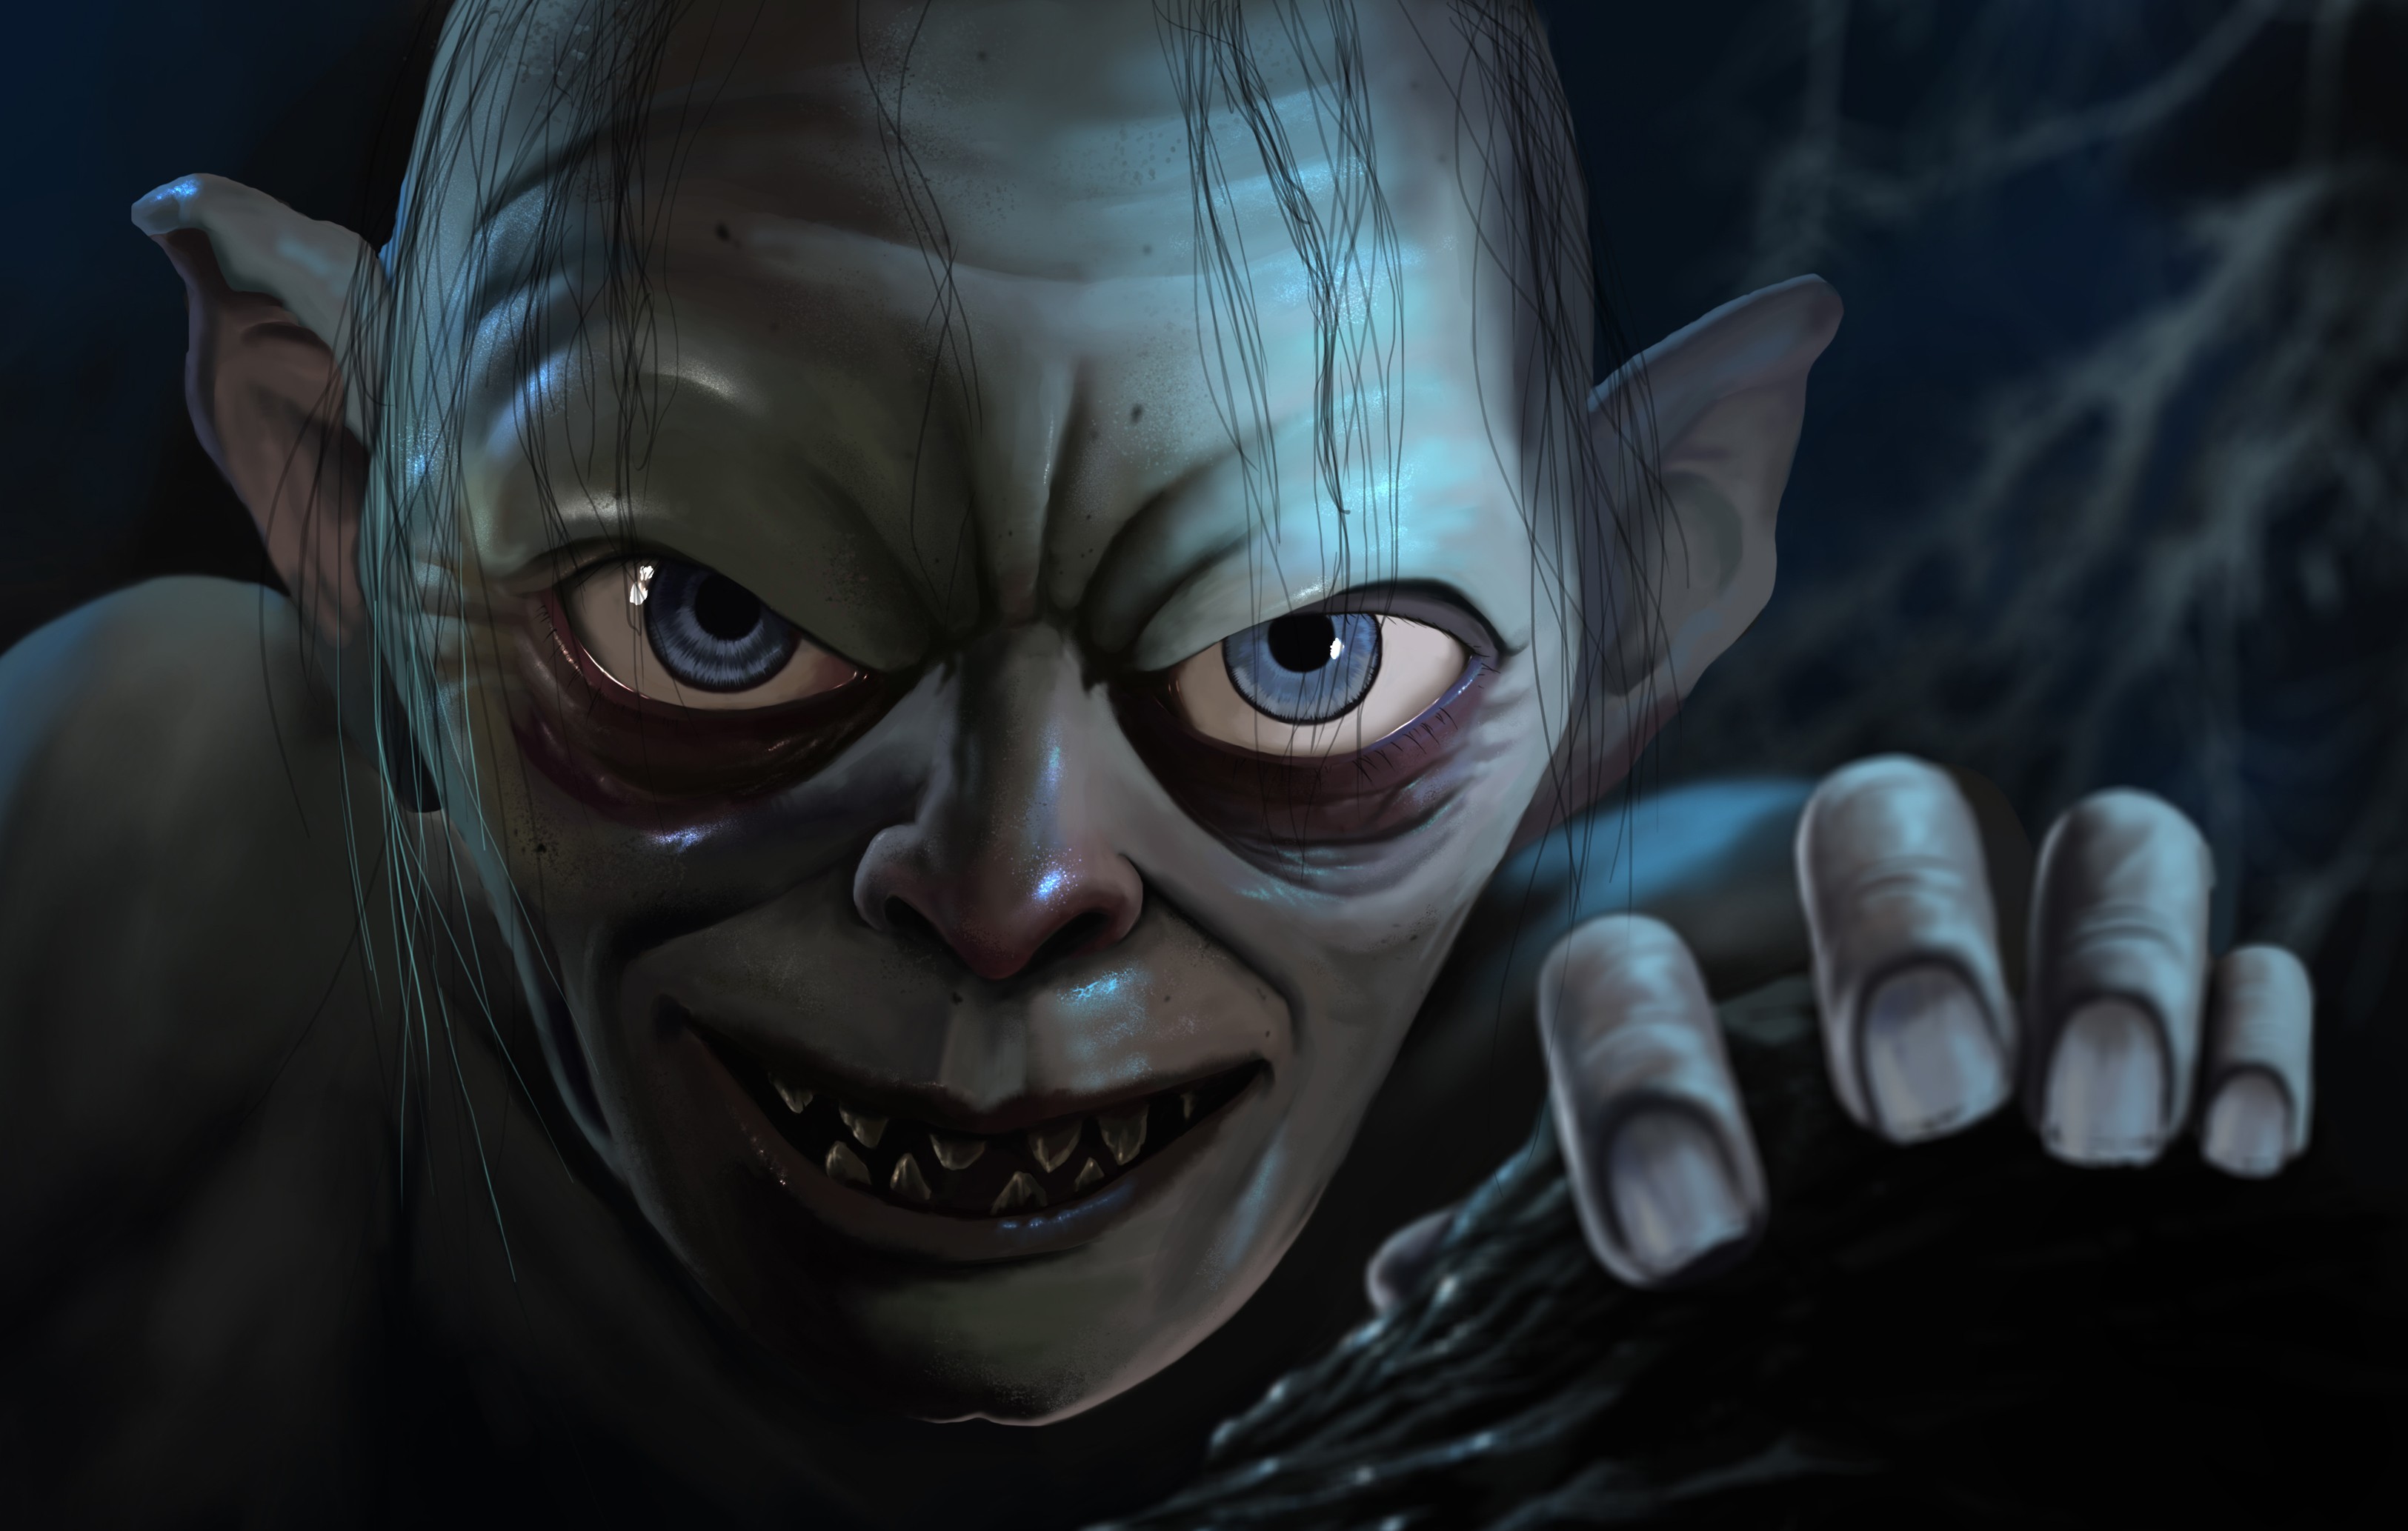 Gollum, Smeagol, The Lord of the Rings, CGI, Creature, Render, Fantasy art Wallpapers HD